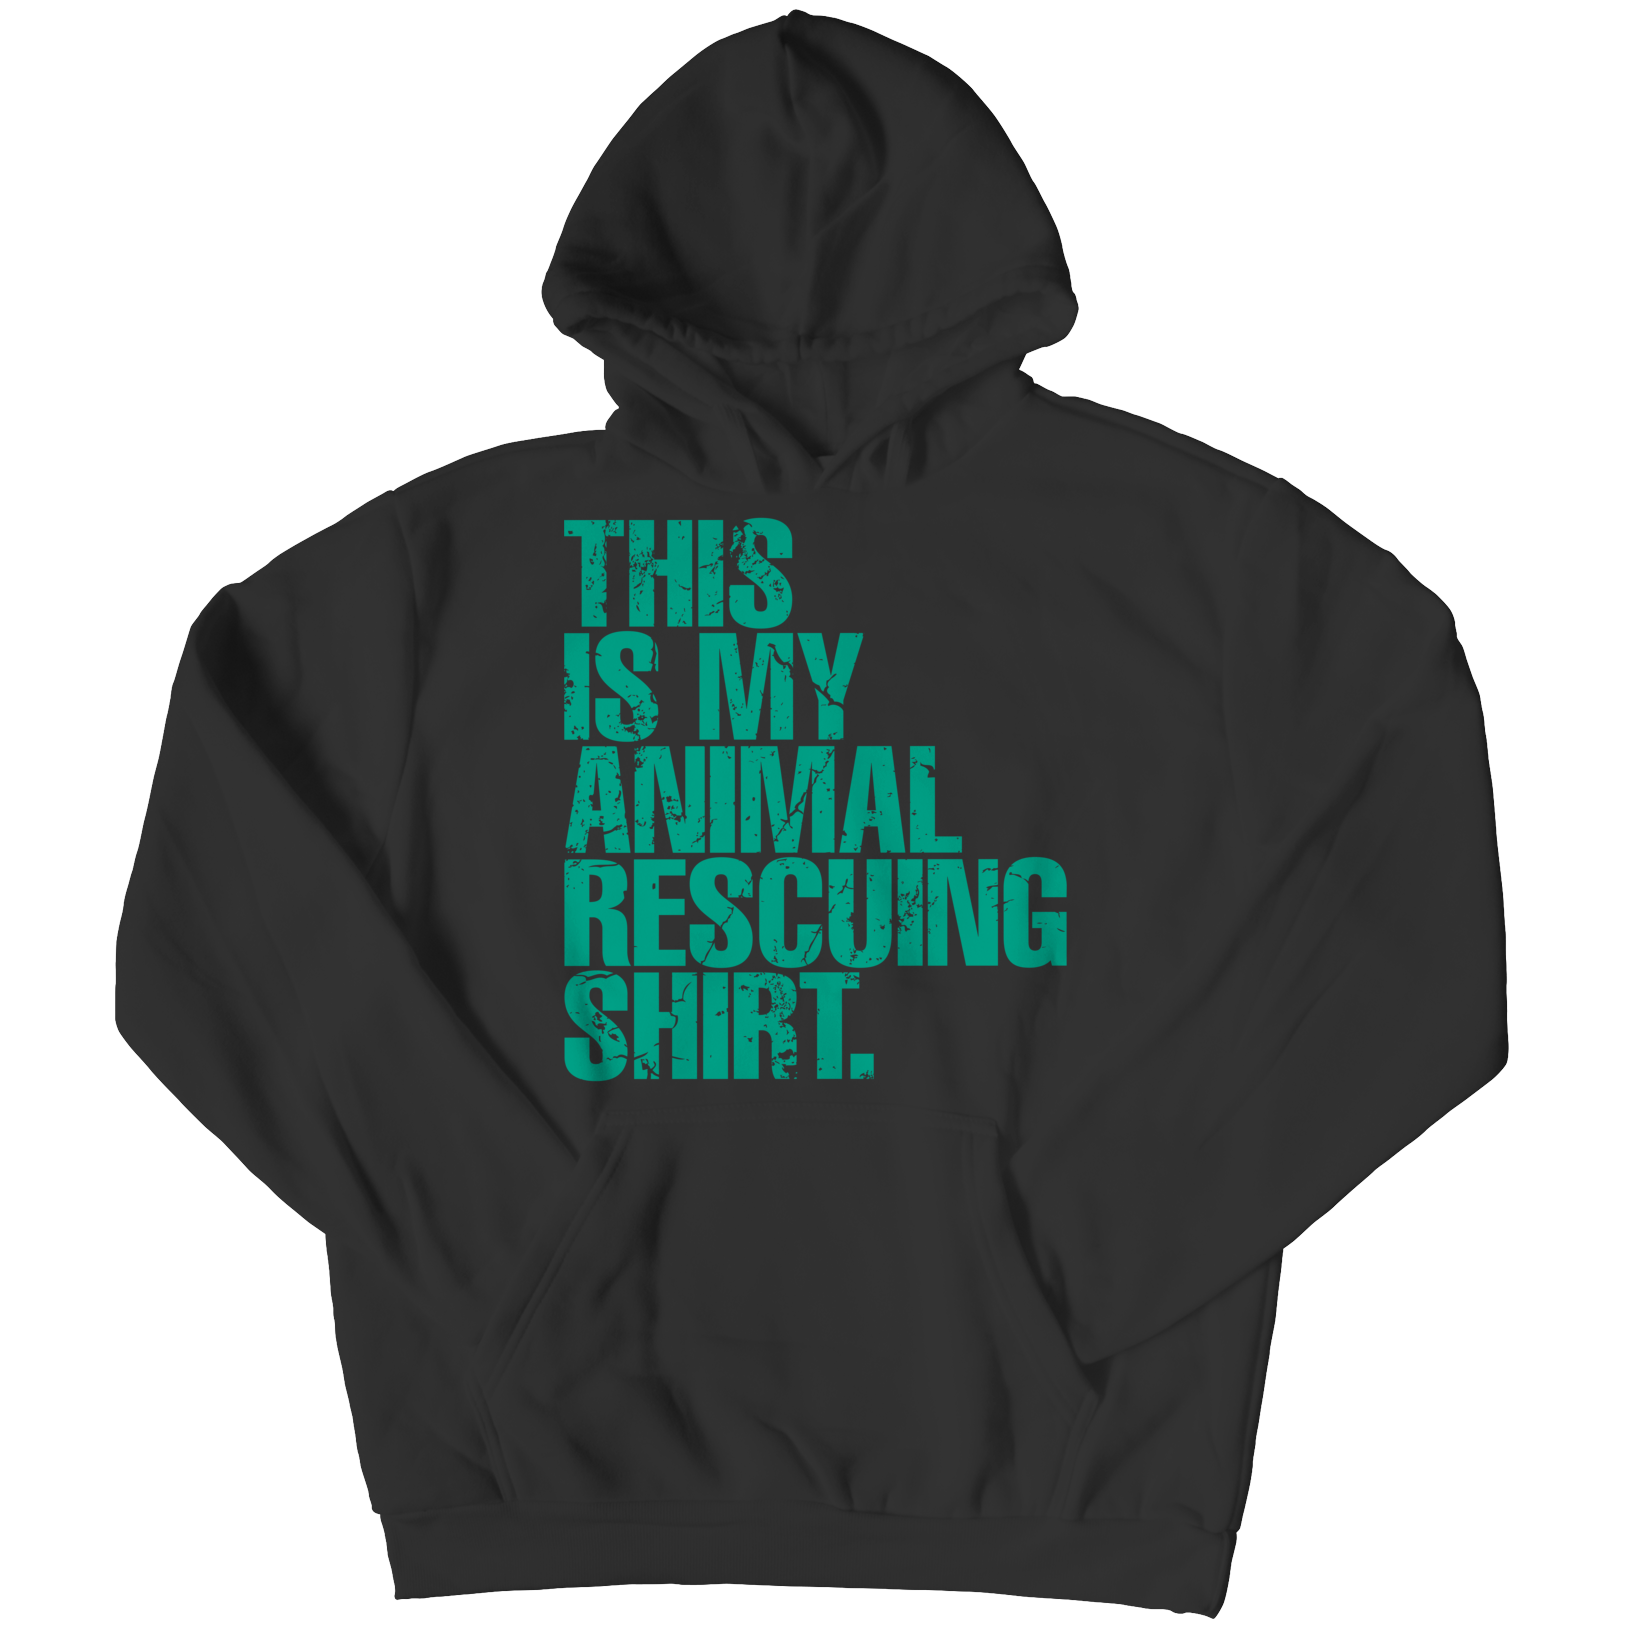 This is My Animal Rescuing Shirt